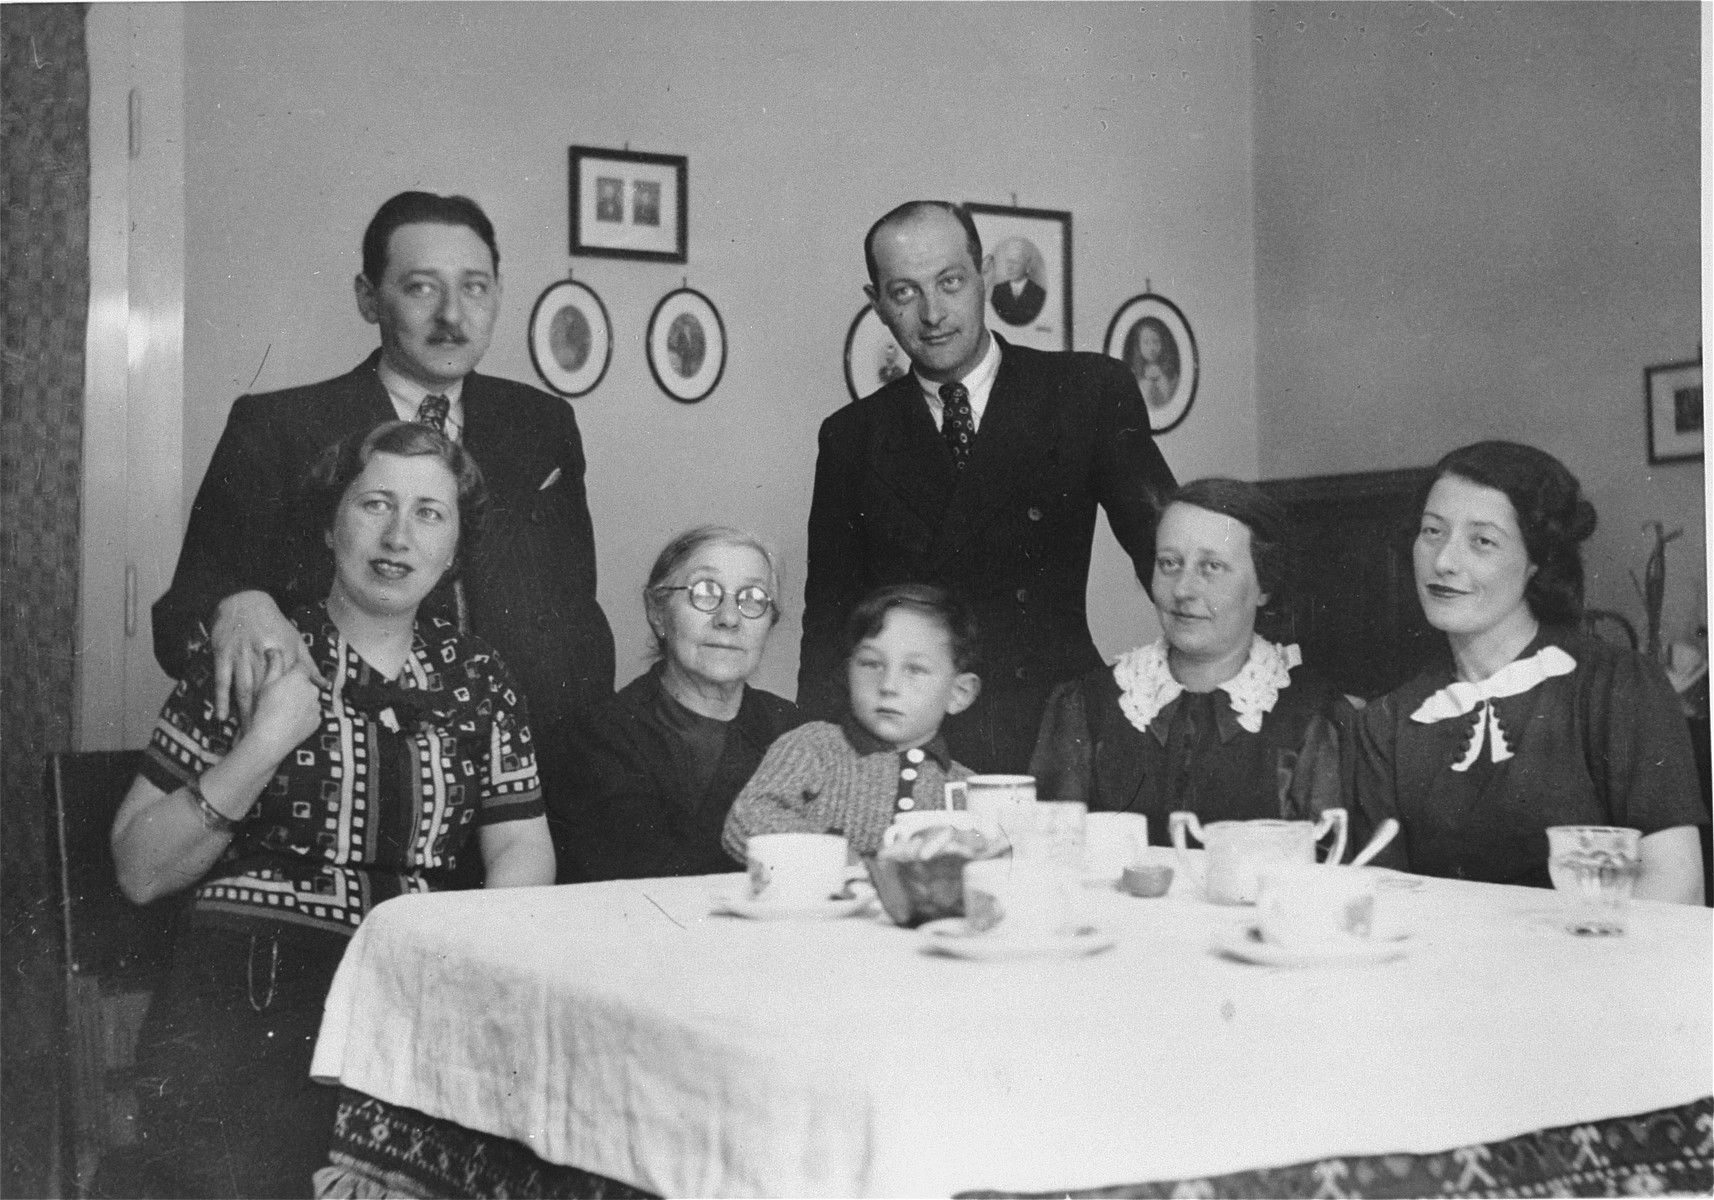 Members of the extended Kornhauser family sit around a dining room table.  

Pictured from left to right are: Mr. and Mrs. Laszlo Kornhauser, Gyorgy Pick, Malvina (Spitzer) Kornhauser, Istvan and Margit Pick, and Mrs. Karoly Kornhauser.